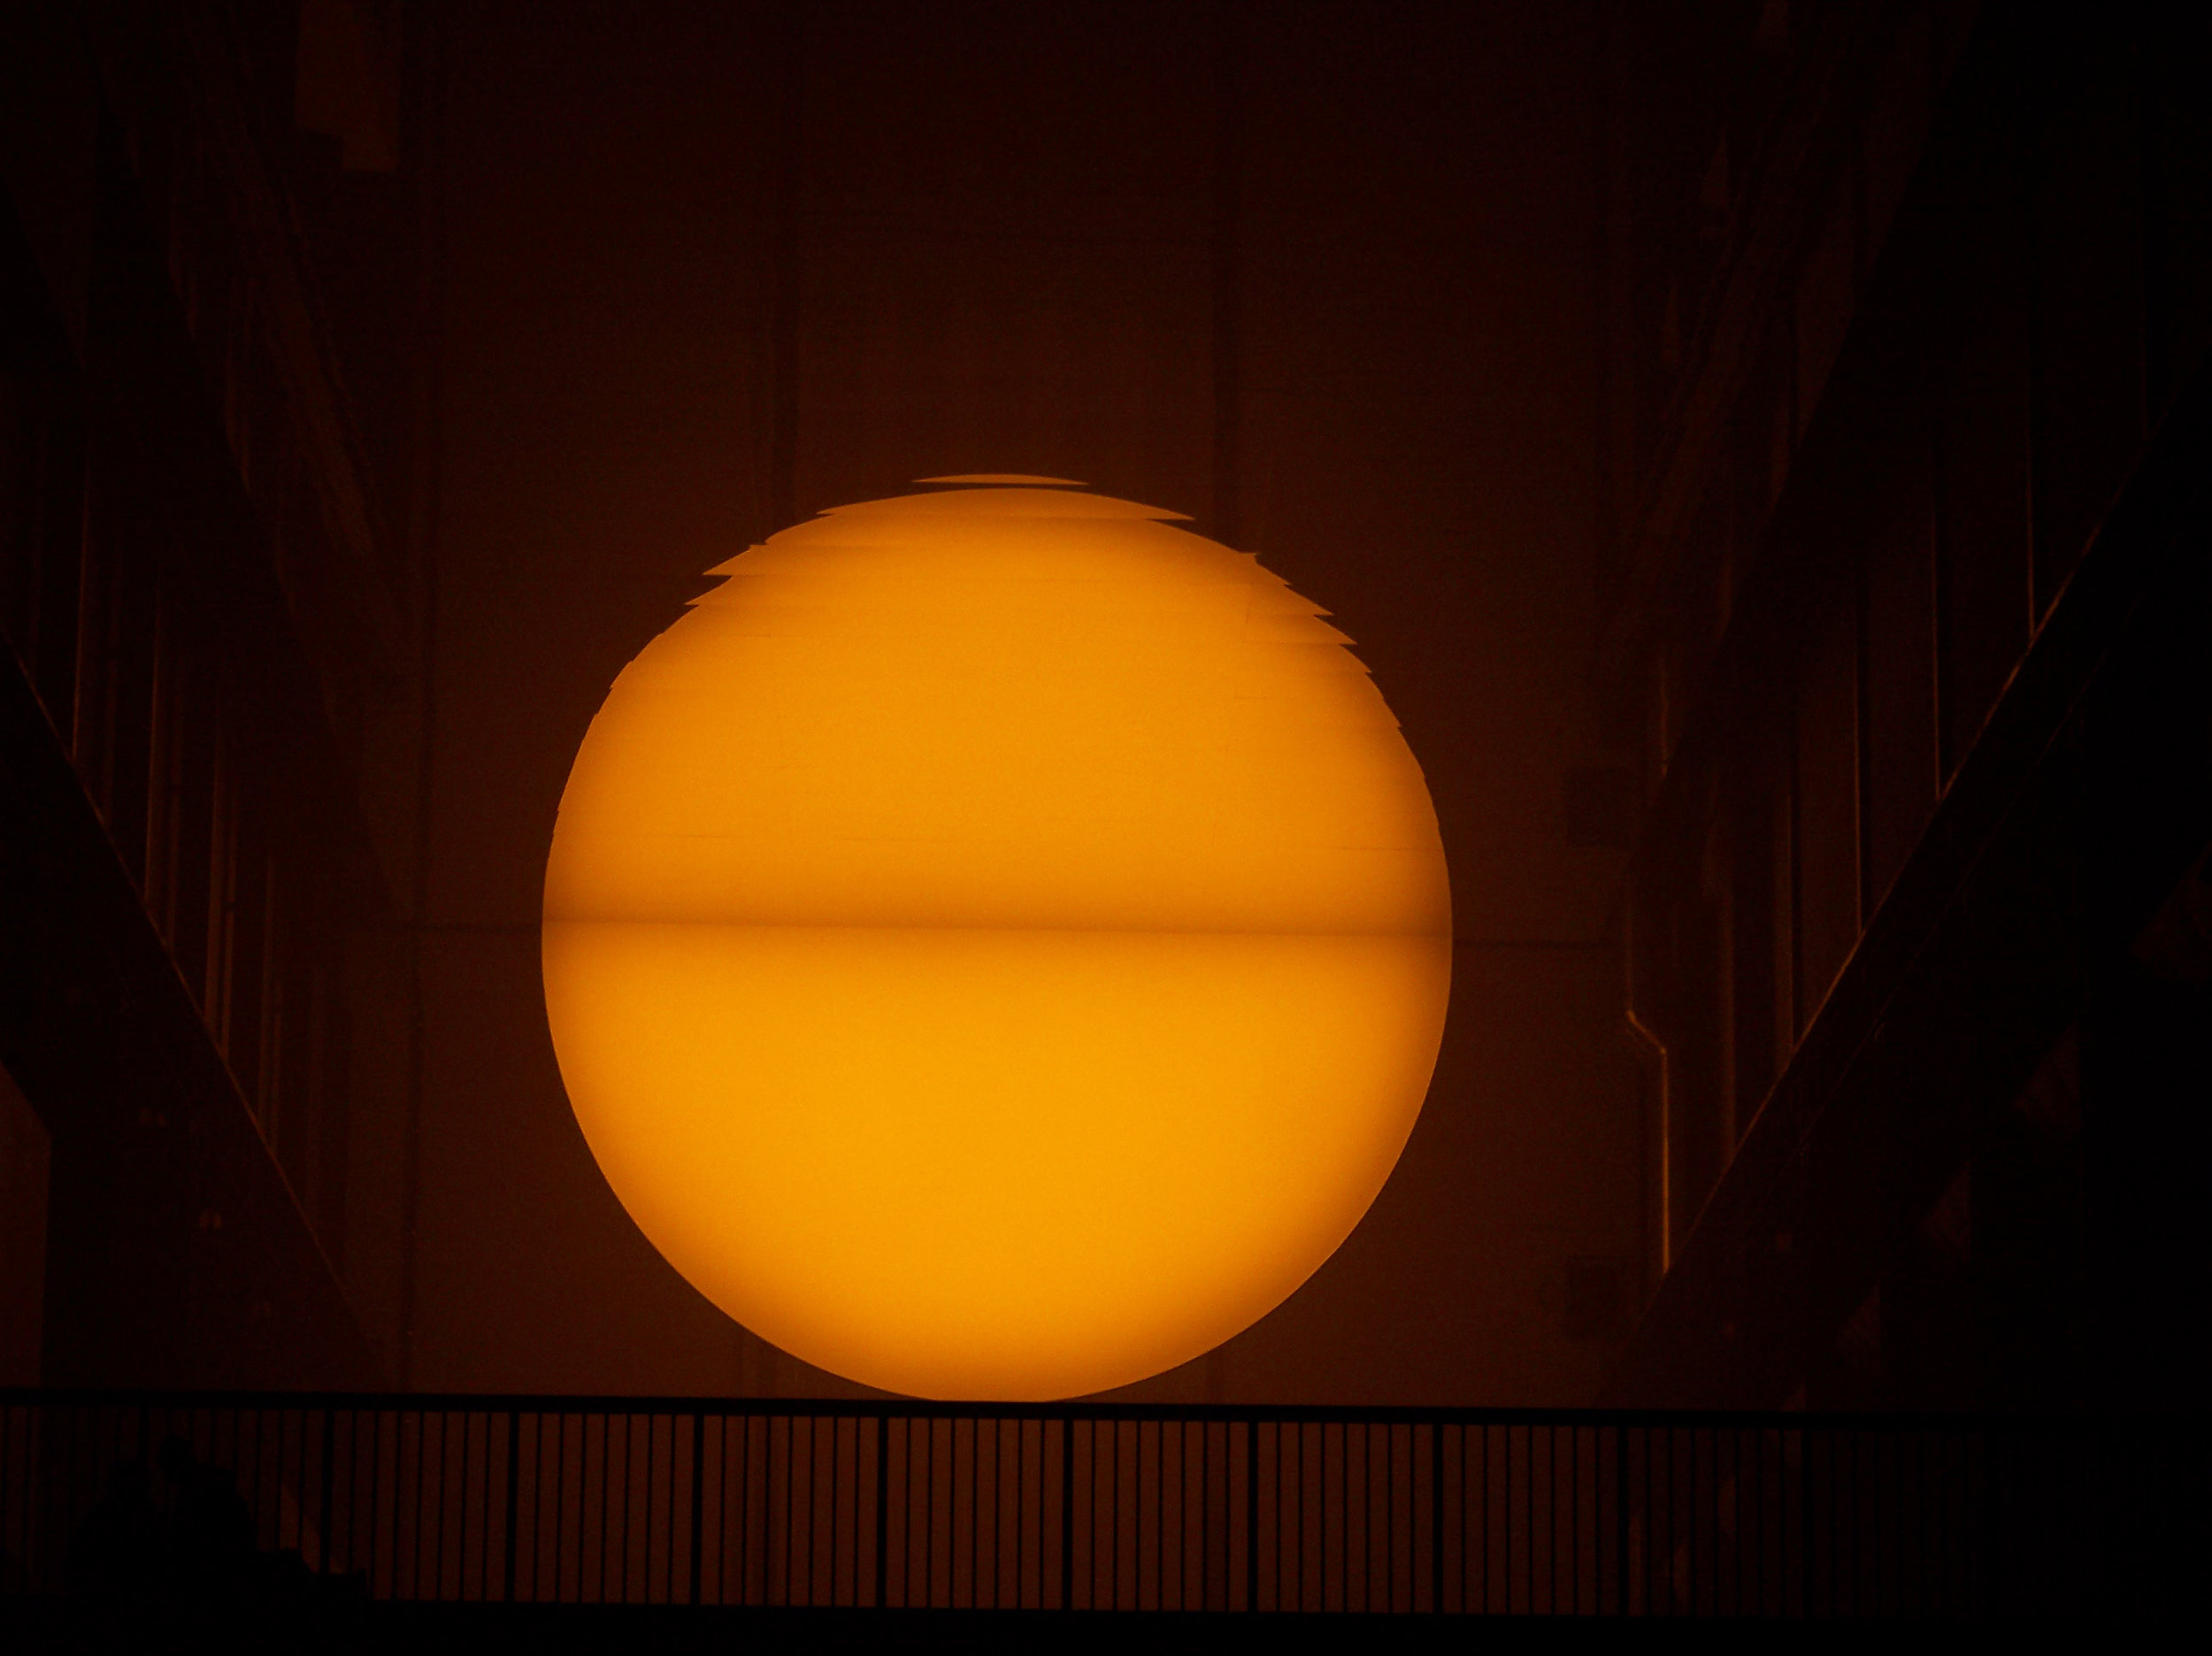 2004_01-08_Olafur-Eliasson_The-Weather-Project-[Tate-Modern]_7_Photograph_James-Bulley.jpg